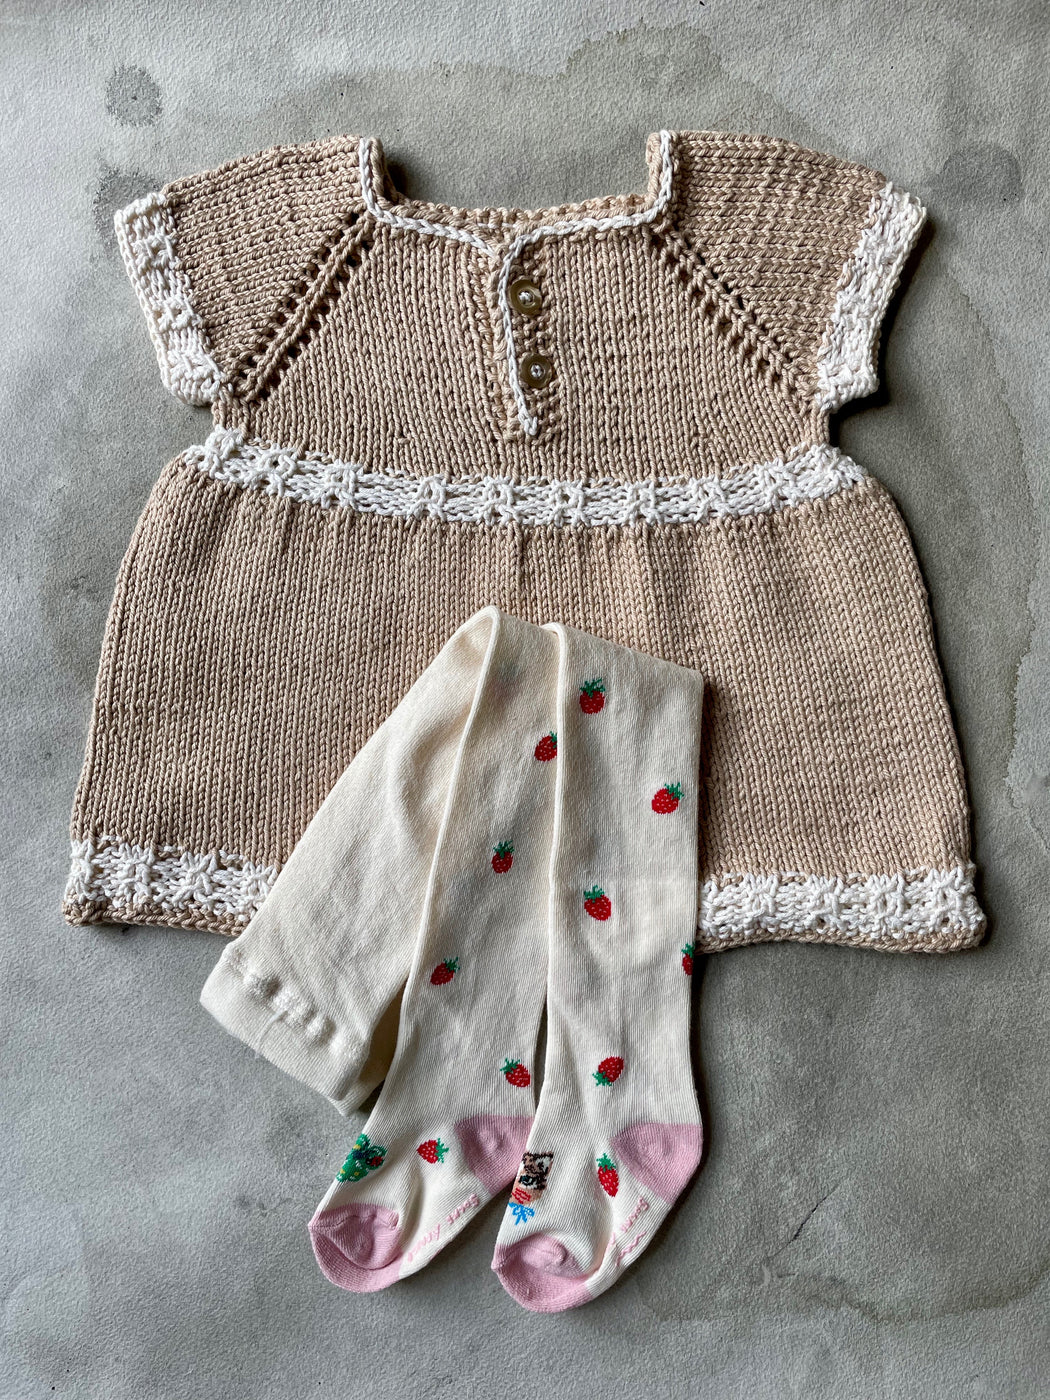 Hand-Knitted Cotton Baby Dress by Albo - Beige